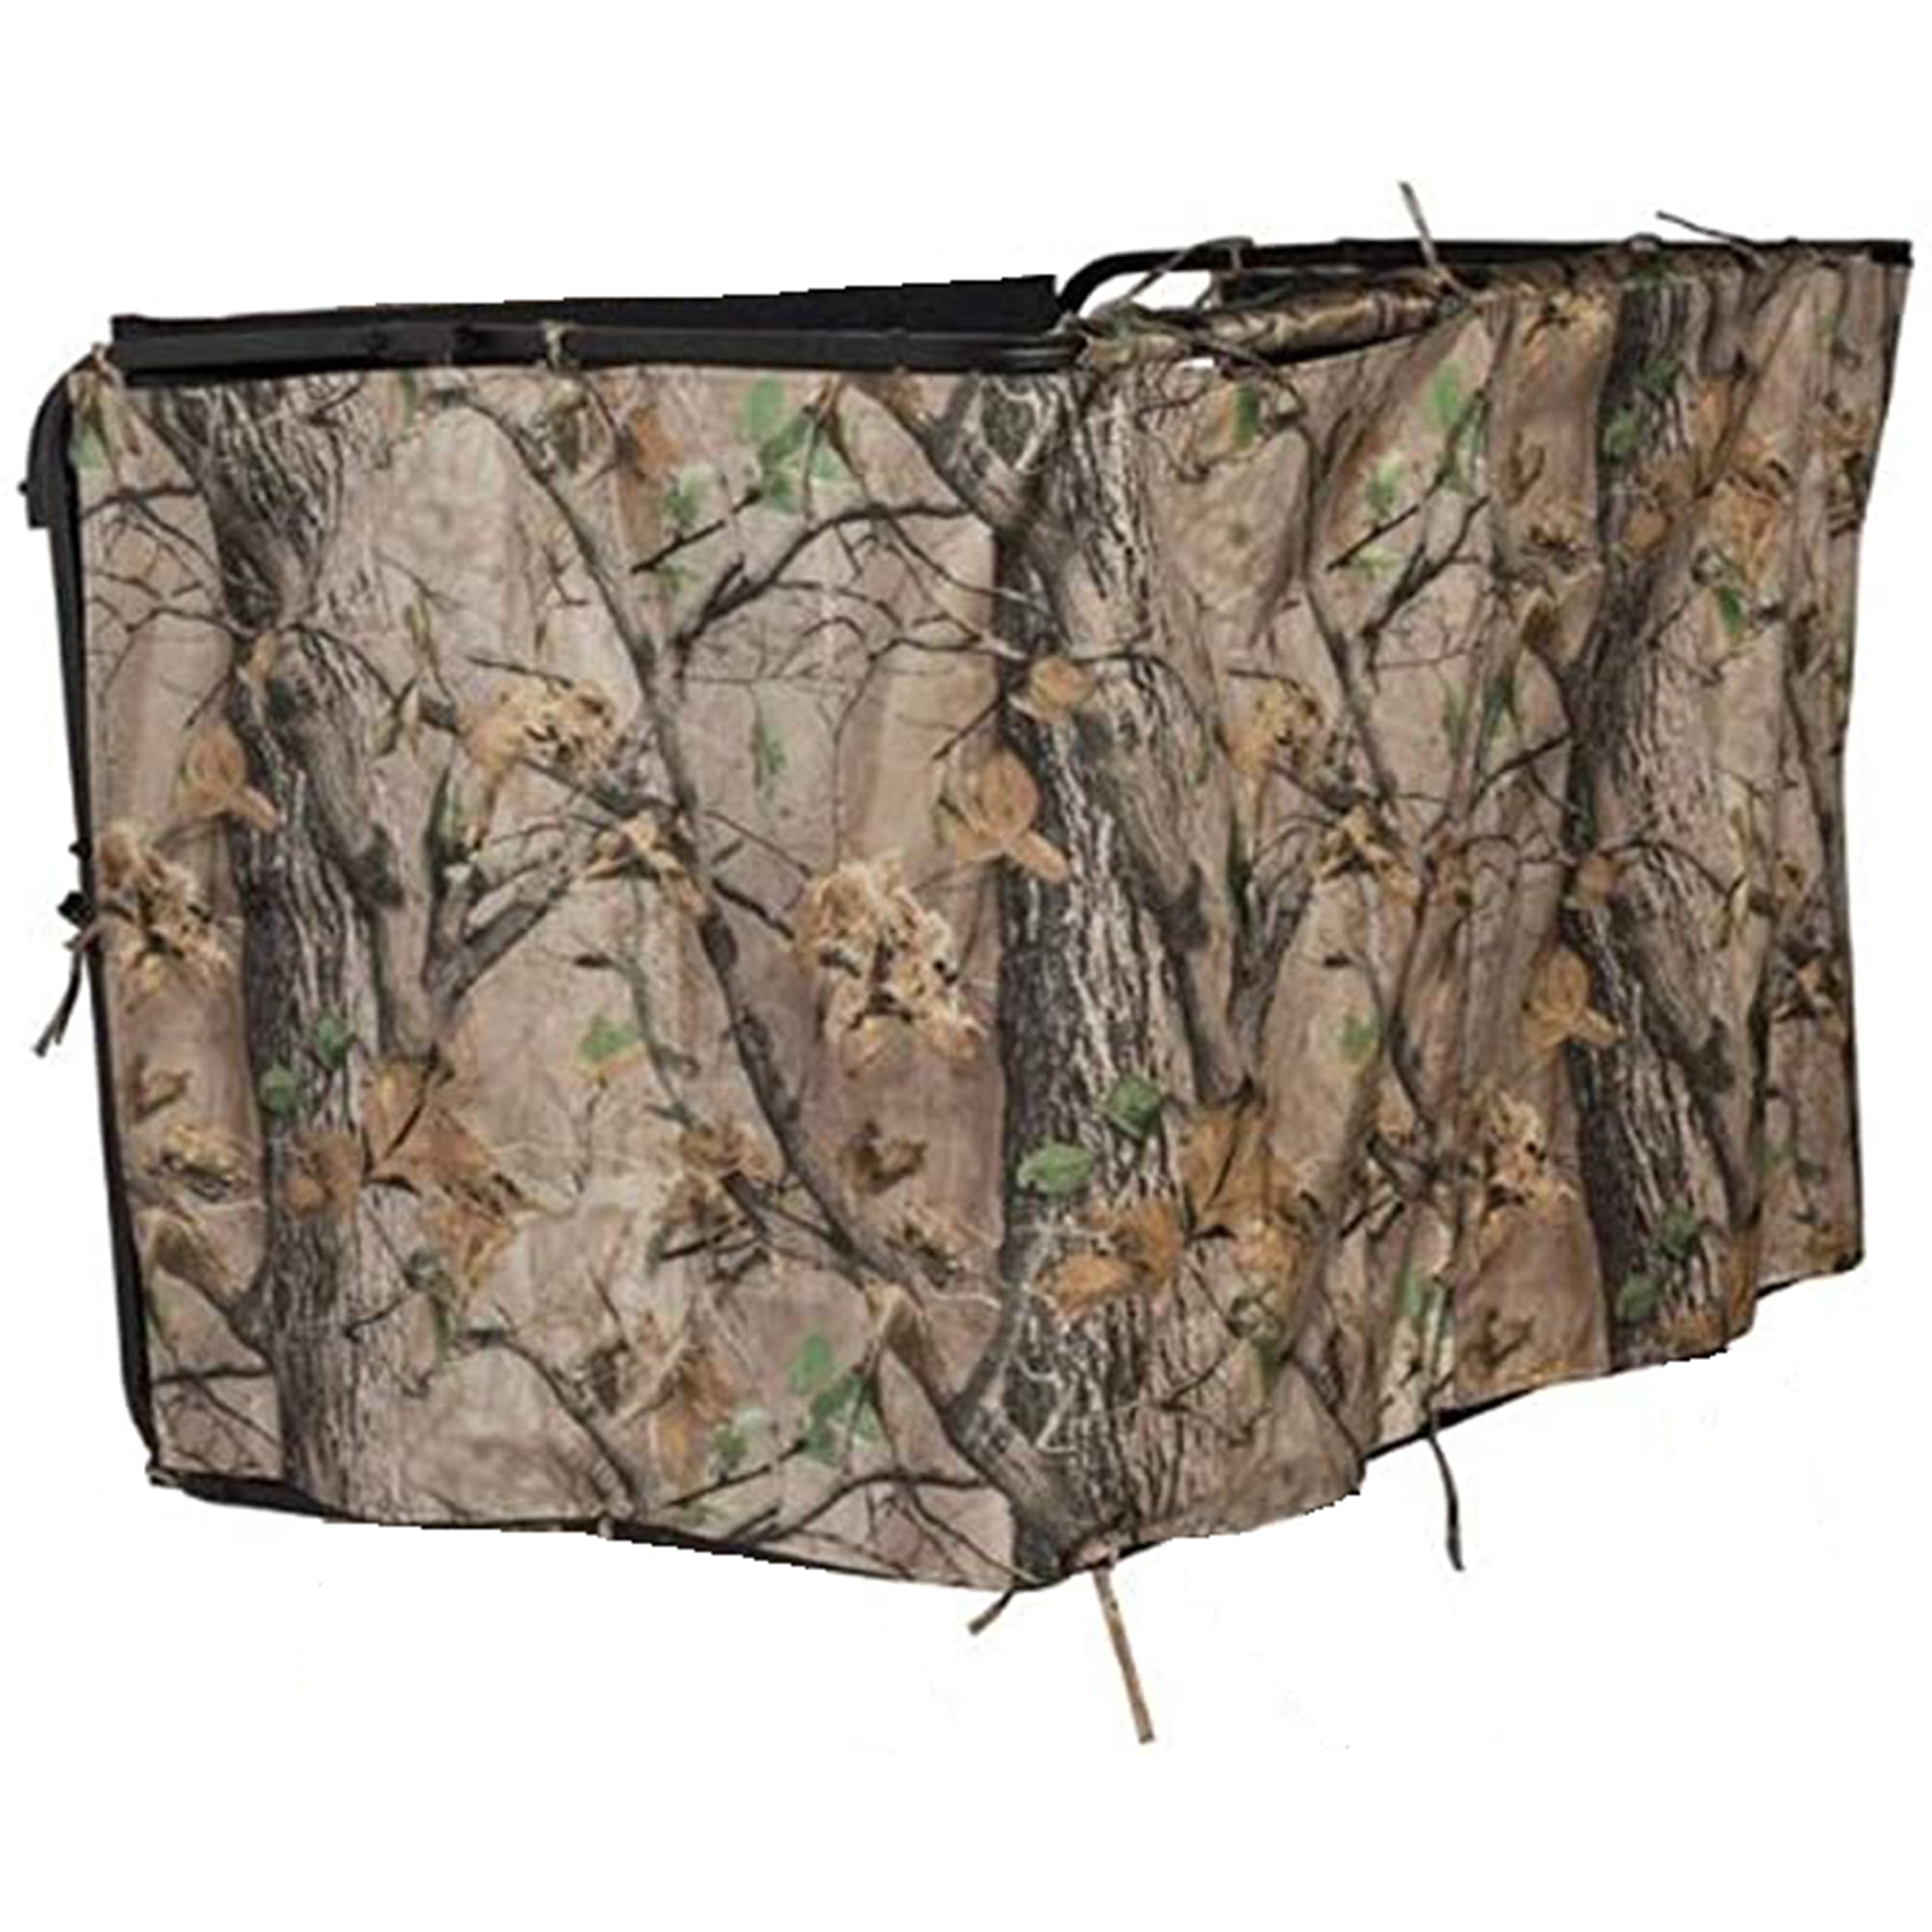 Allen 5219 Mossy Oak Country Camo Material Hunting Tree Stand Blind 